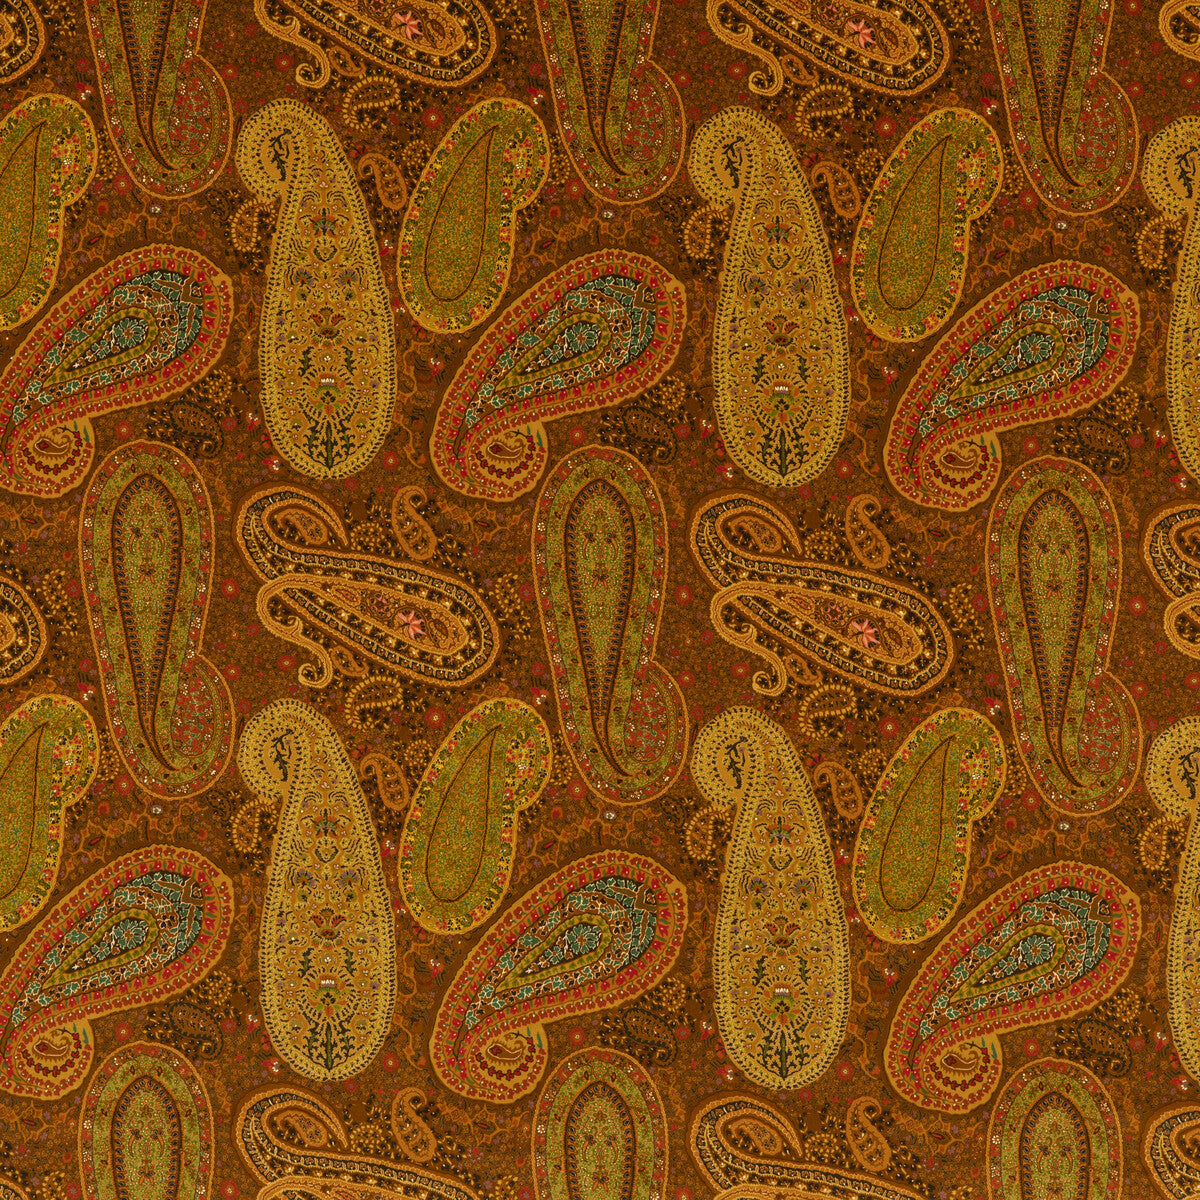 Peregrine Paisley Velvet fabric in spice color - pattern FD2002.T30.0 - by Mulberry in the Mulberry Long Weekend collection